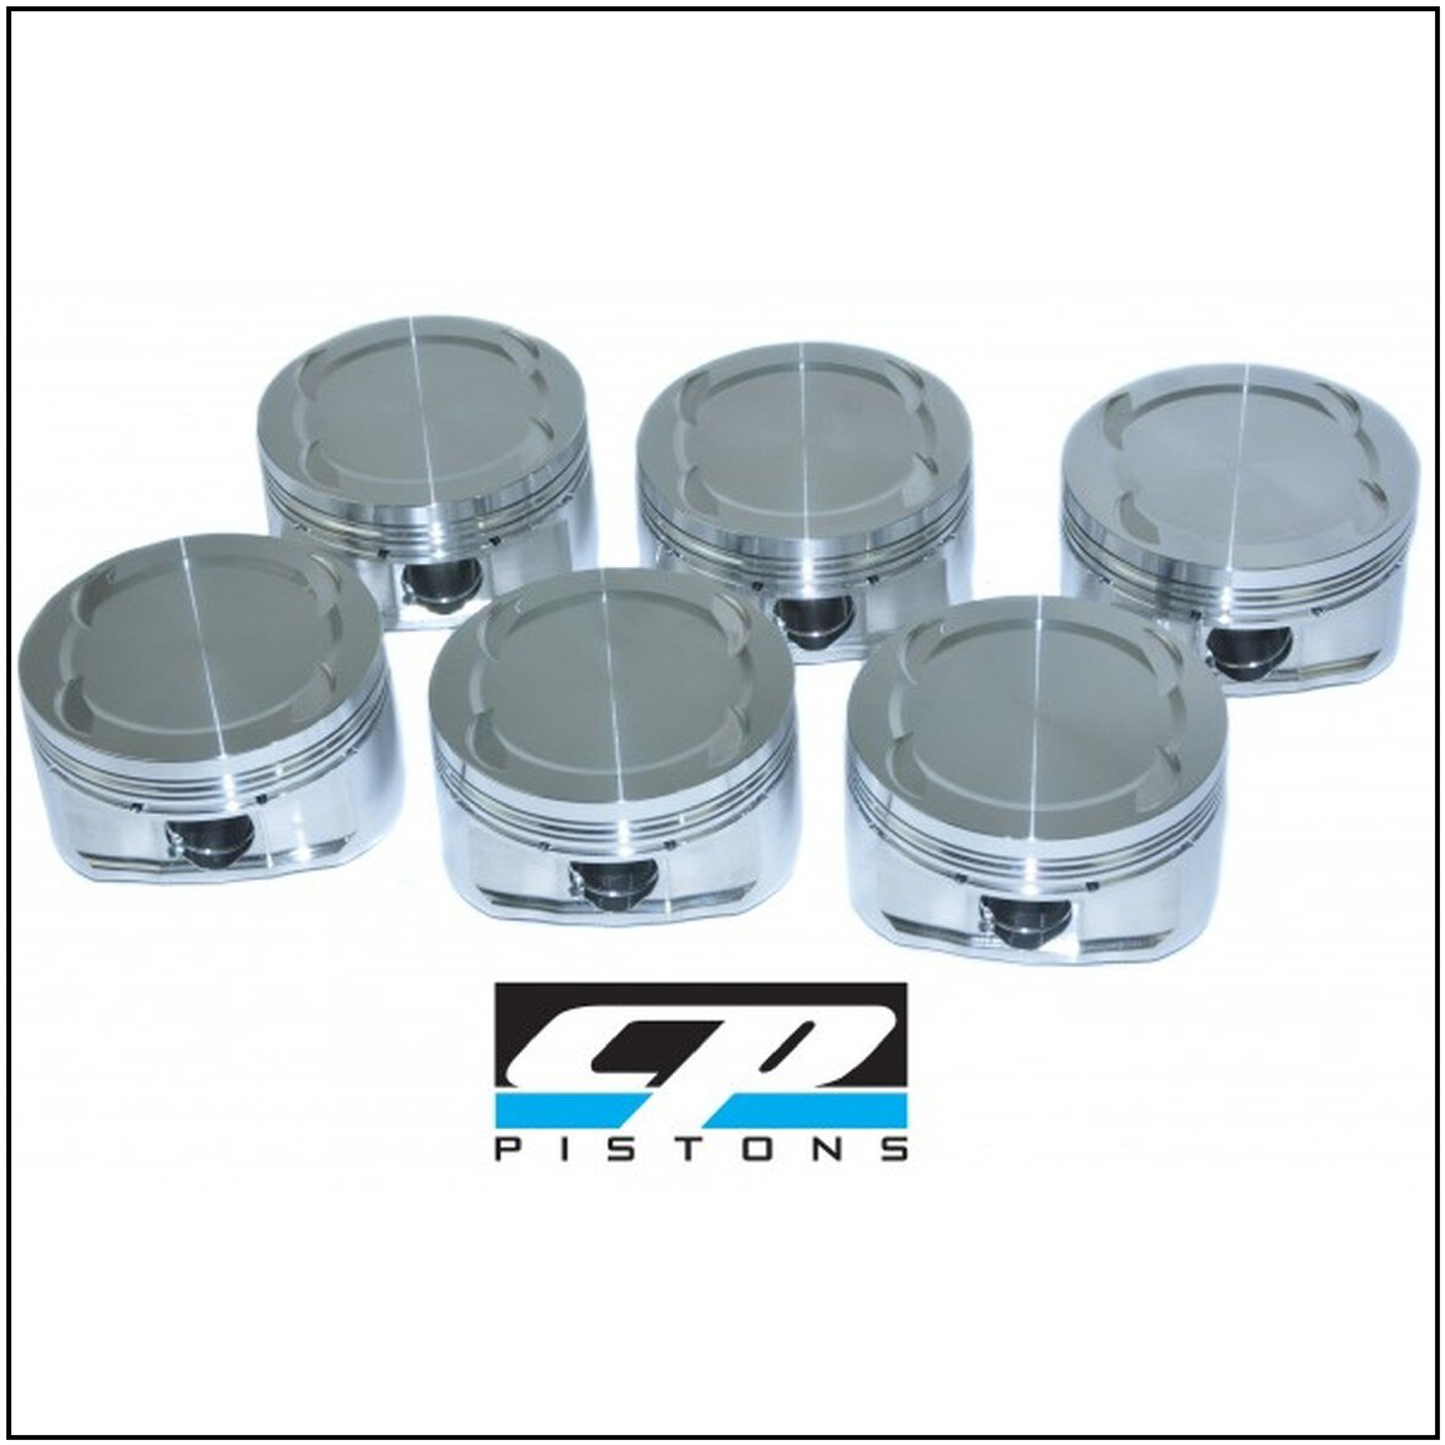 CP-Carrillo Pistons (CR 9.0) for 2JZGTE Toyota Engines